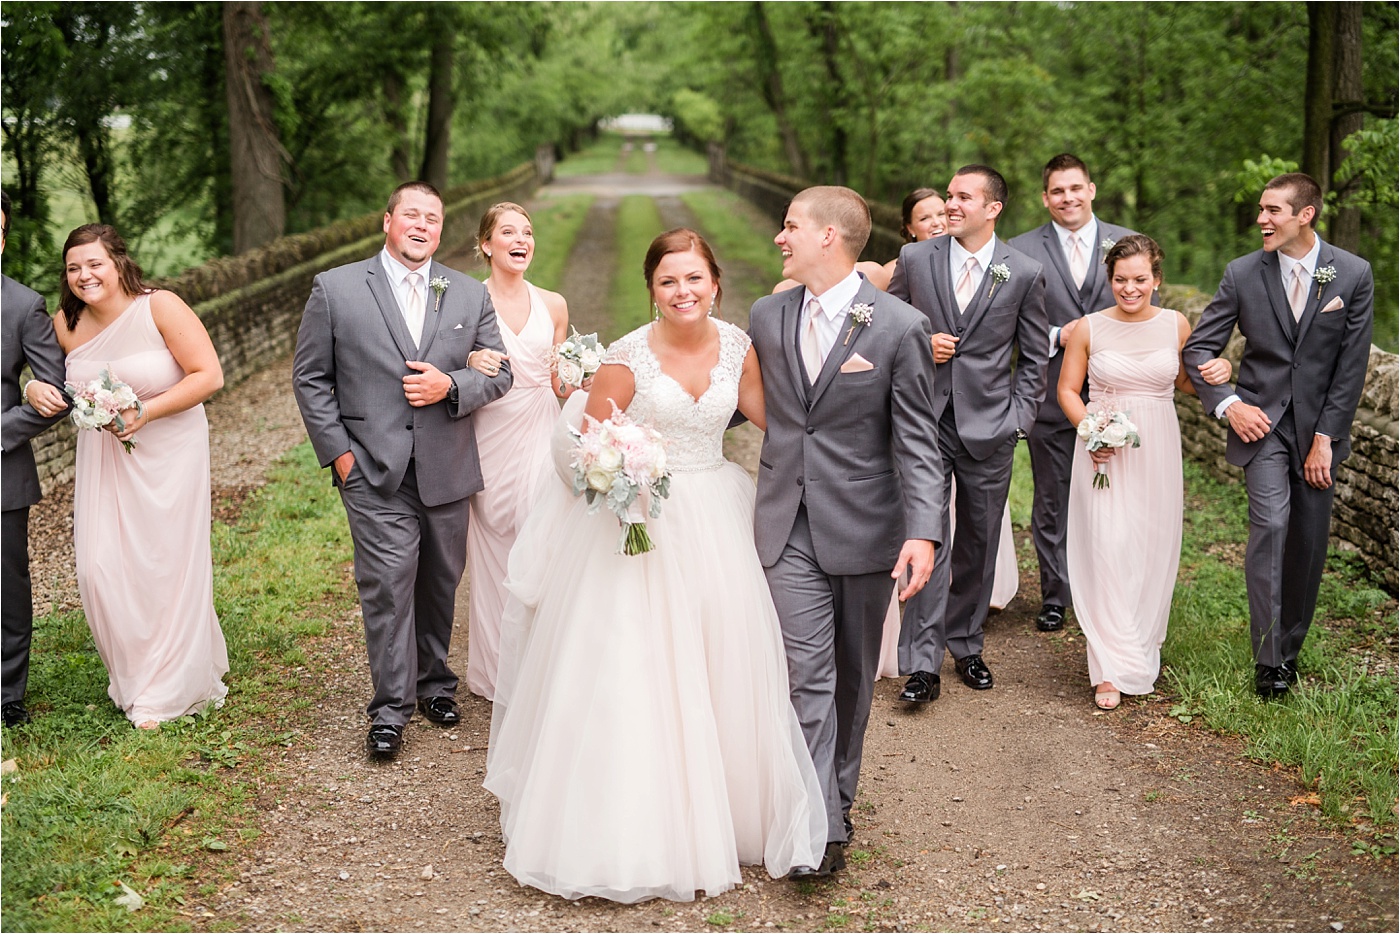 A Blush Outdoor wedding at Irongate Equestrian | KariMe Photography_0120